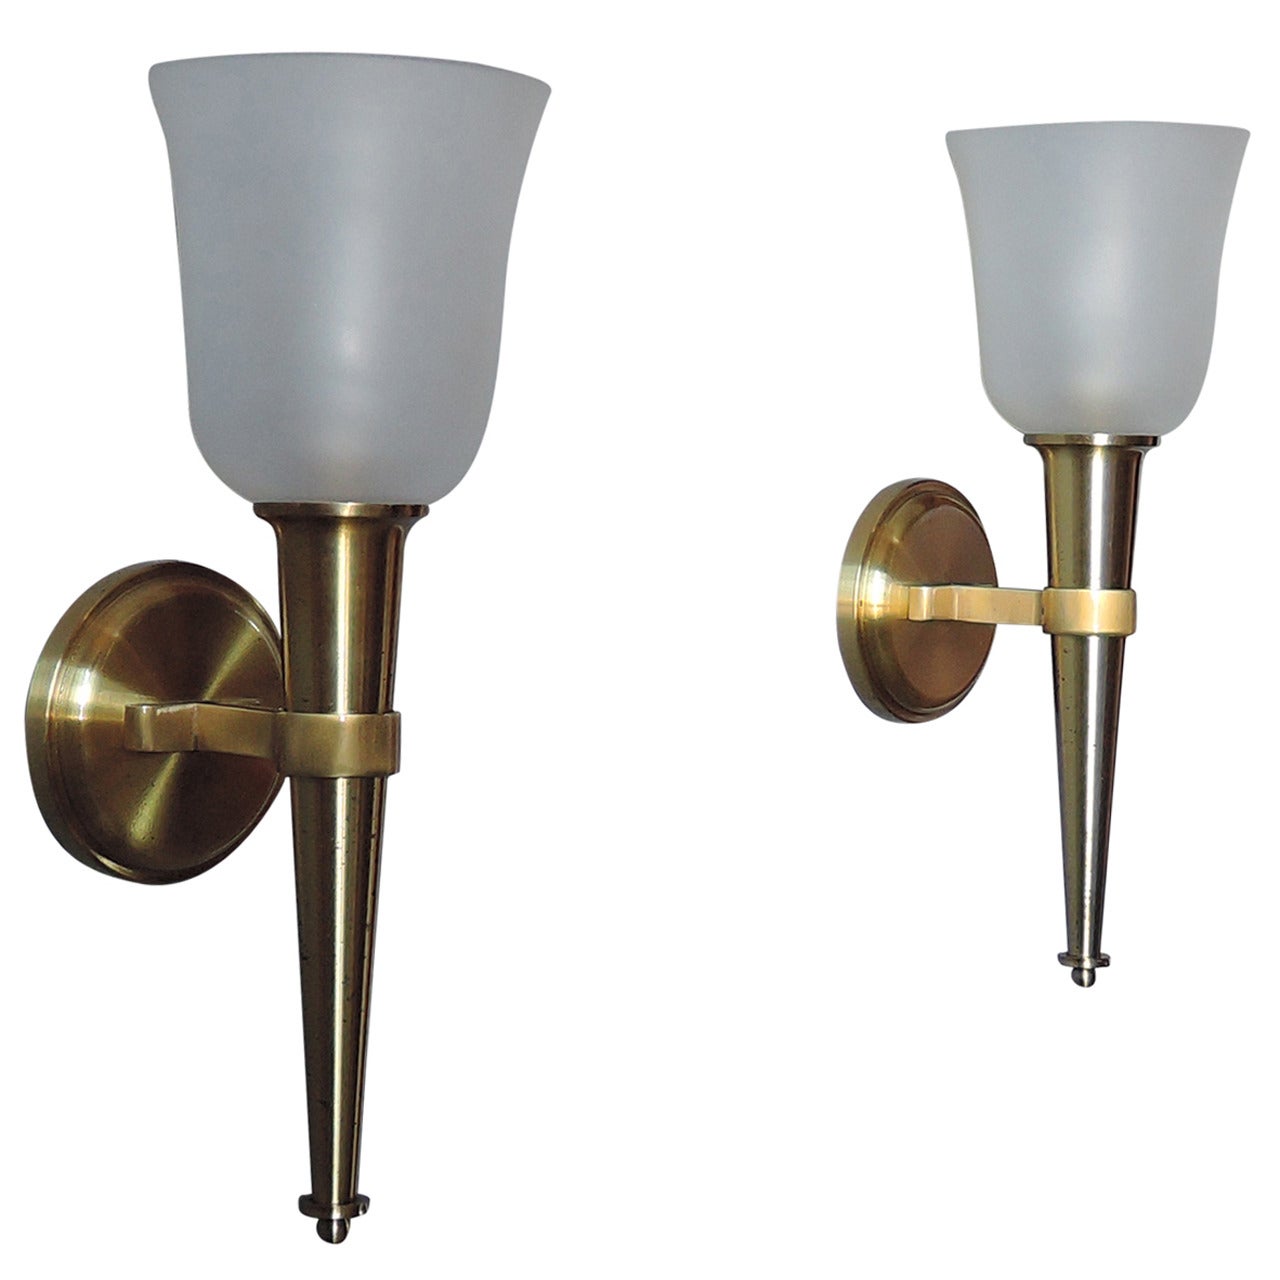 A Pair of French 1950's Bronze and Glass "Torch" Sconces by Jean Perzel